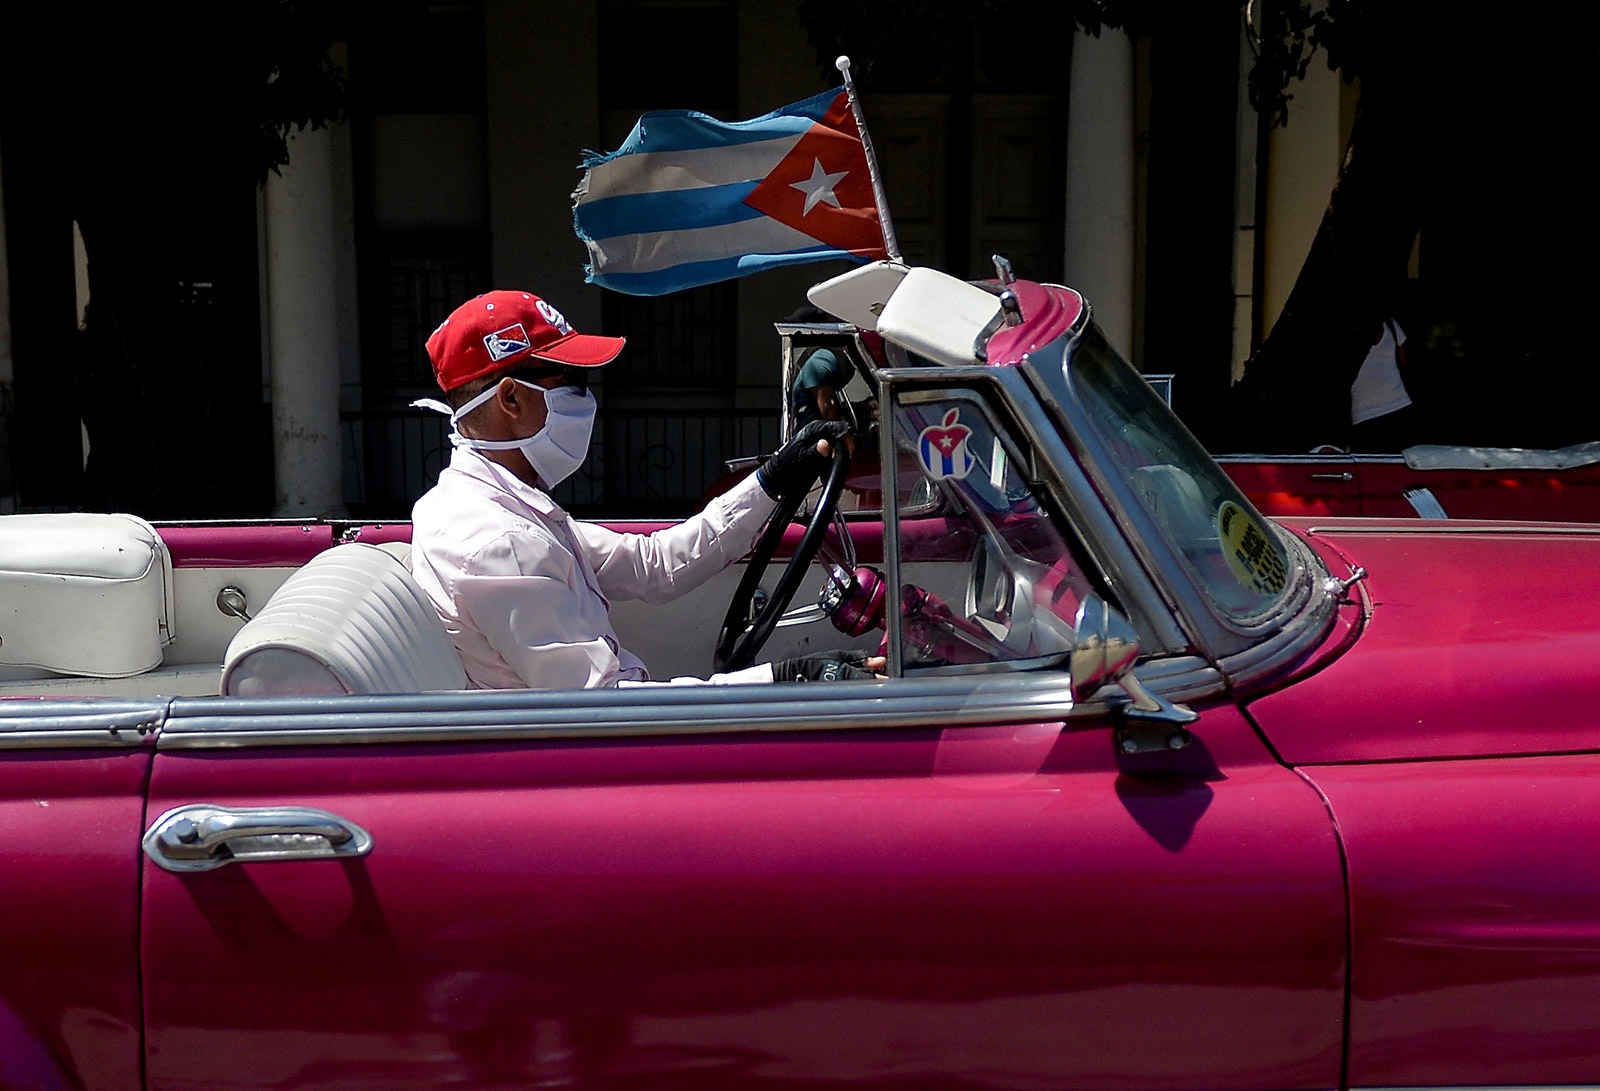 Last Wednesday the first cases of infection were reported in Cuba.